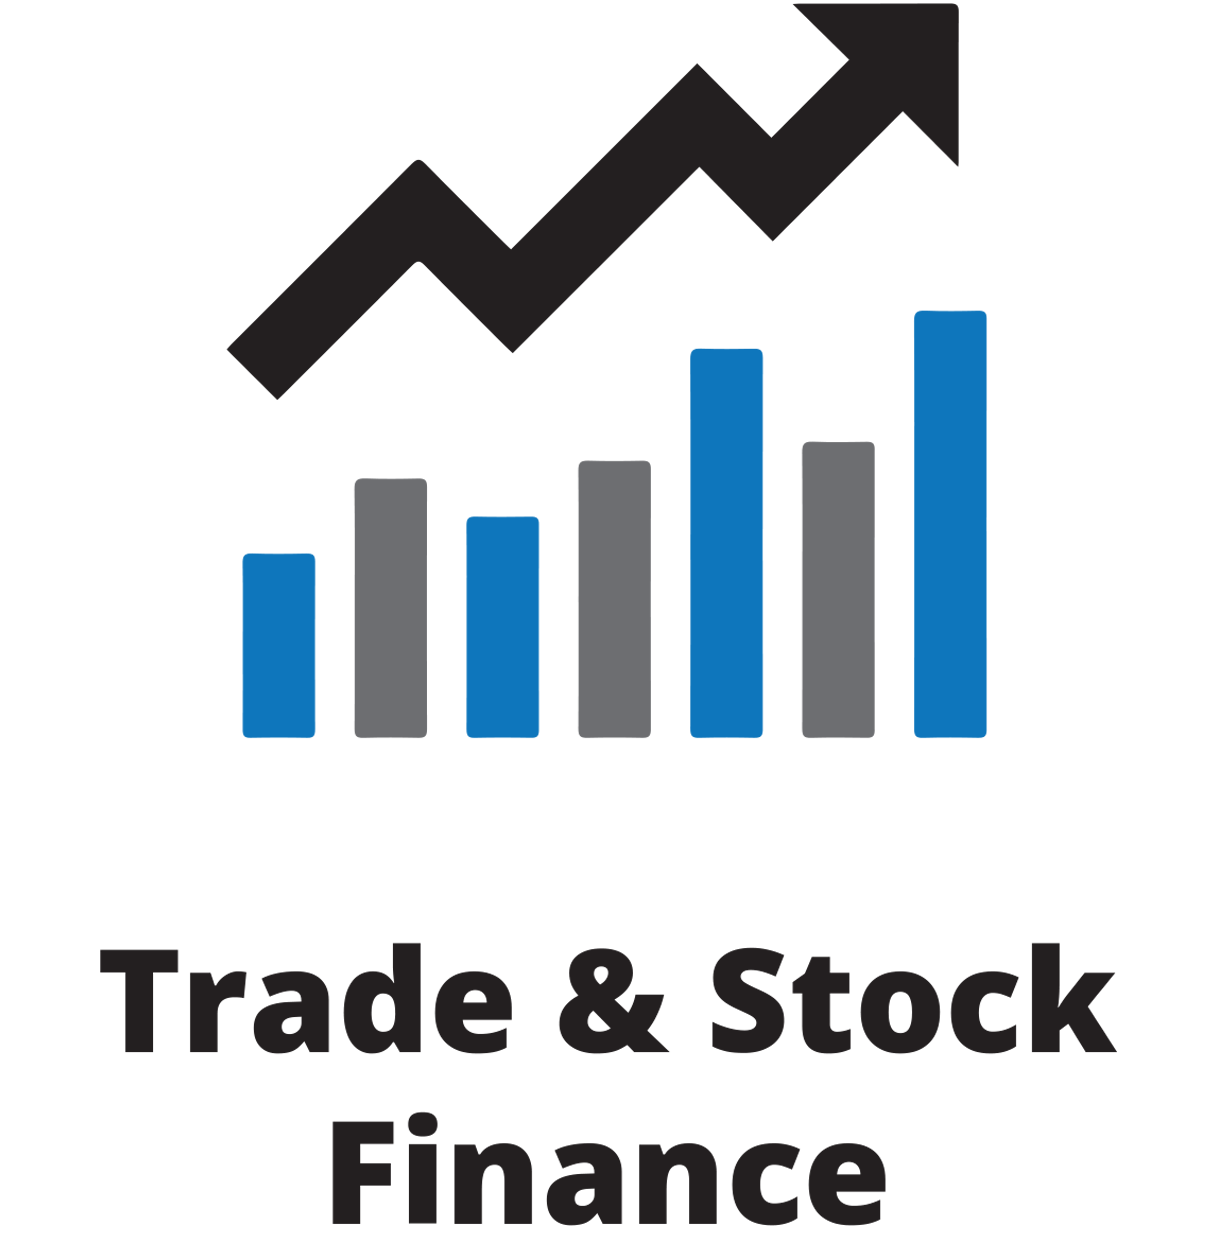 Trade and stock finance